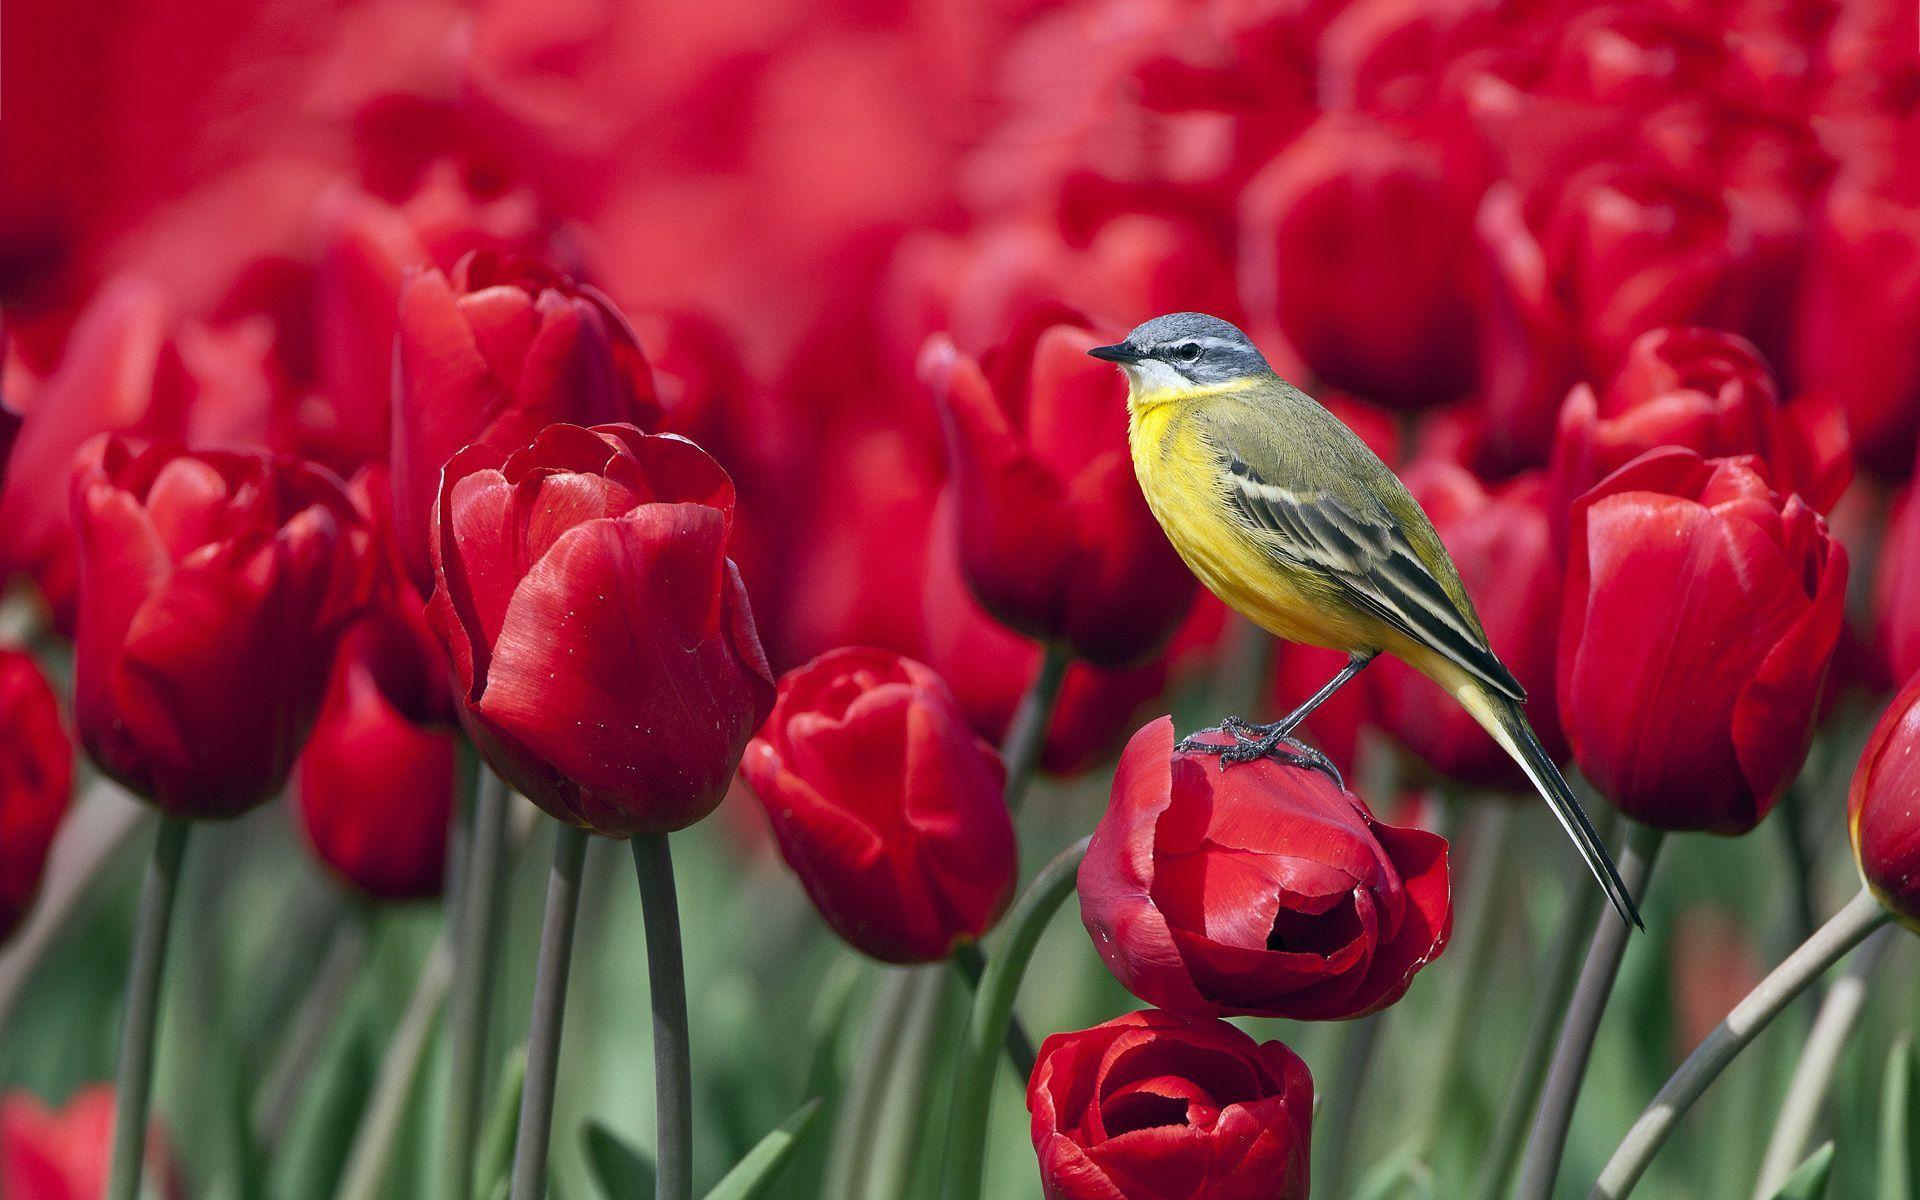 Red Tulips Wallpaper